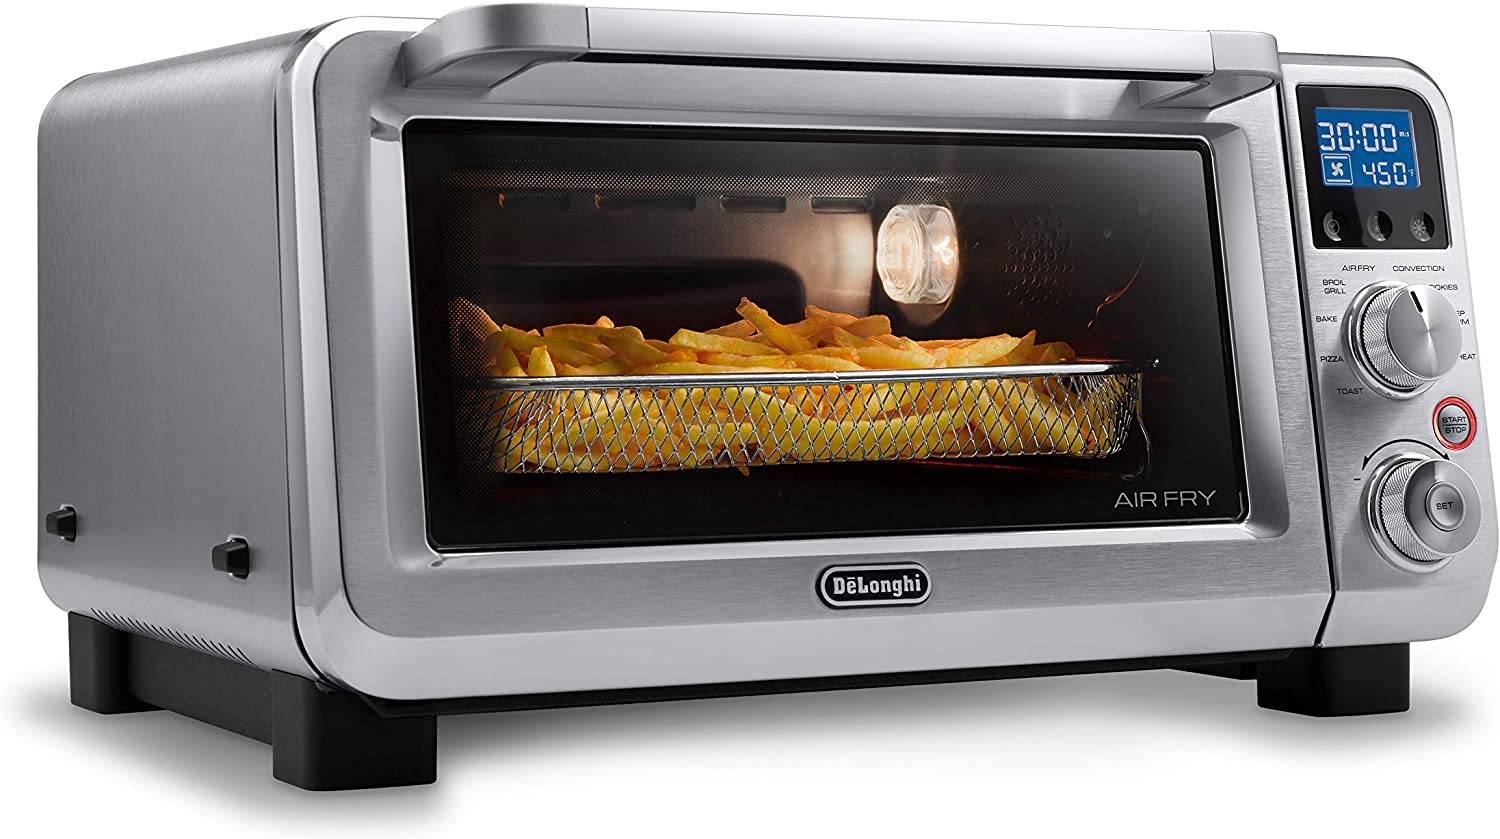 de’longhi eo141164m airfry convection toaster oven